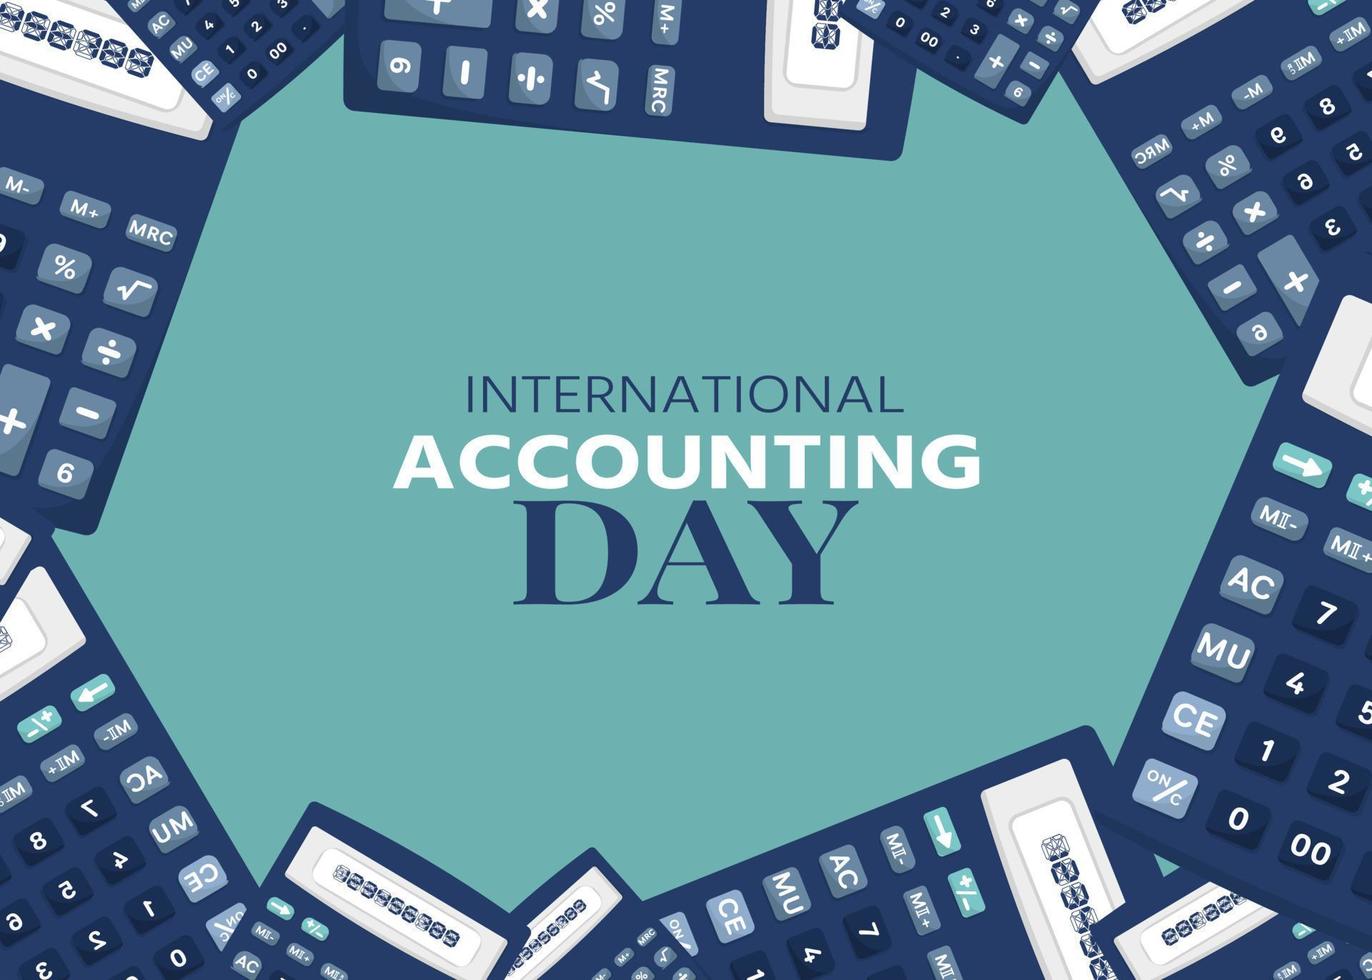 International accounting day banner. Calculator background. November 10. Holiday concept. Template for background, banner, card, poster with text inscription. vector